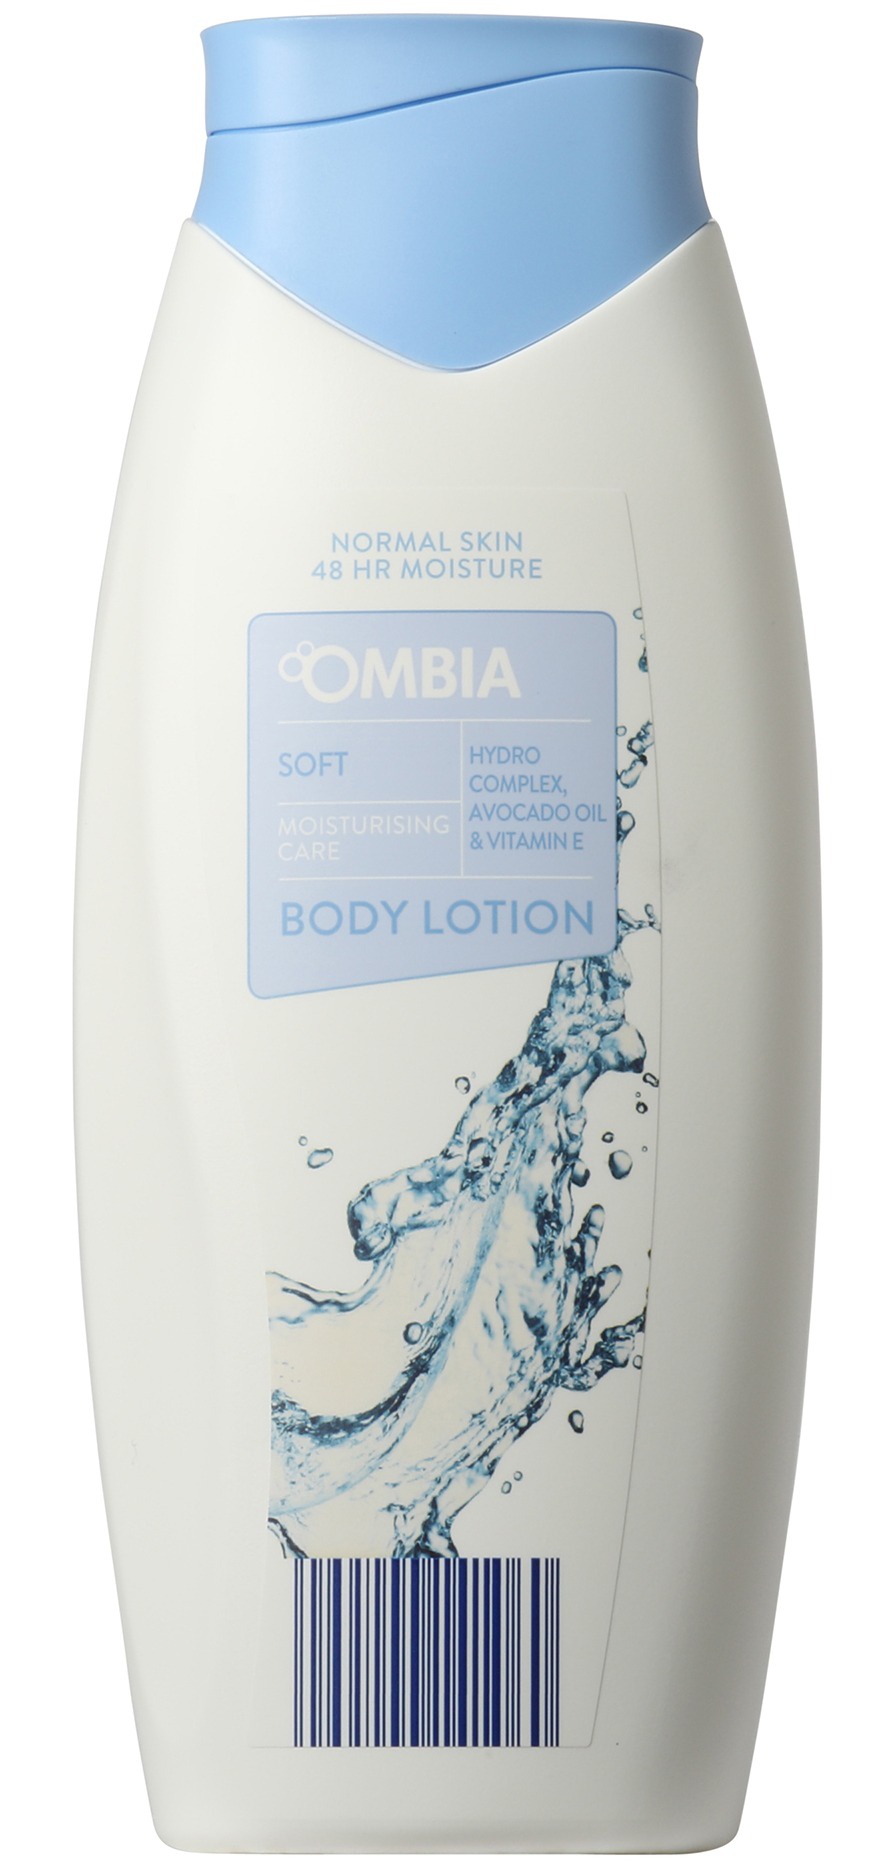 Ombia Soft Body Lotion